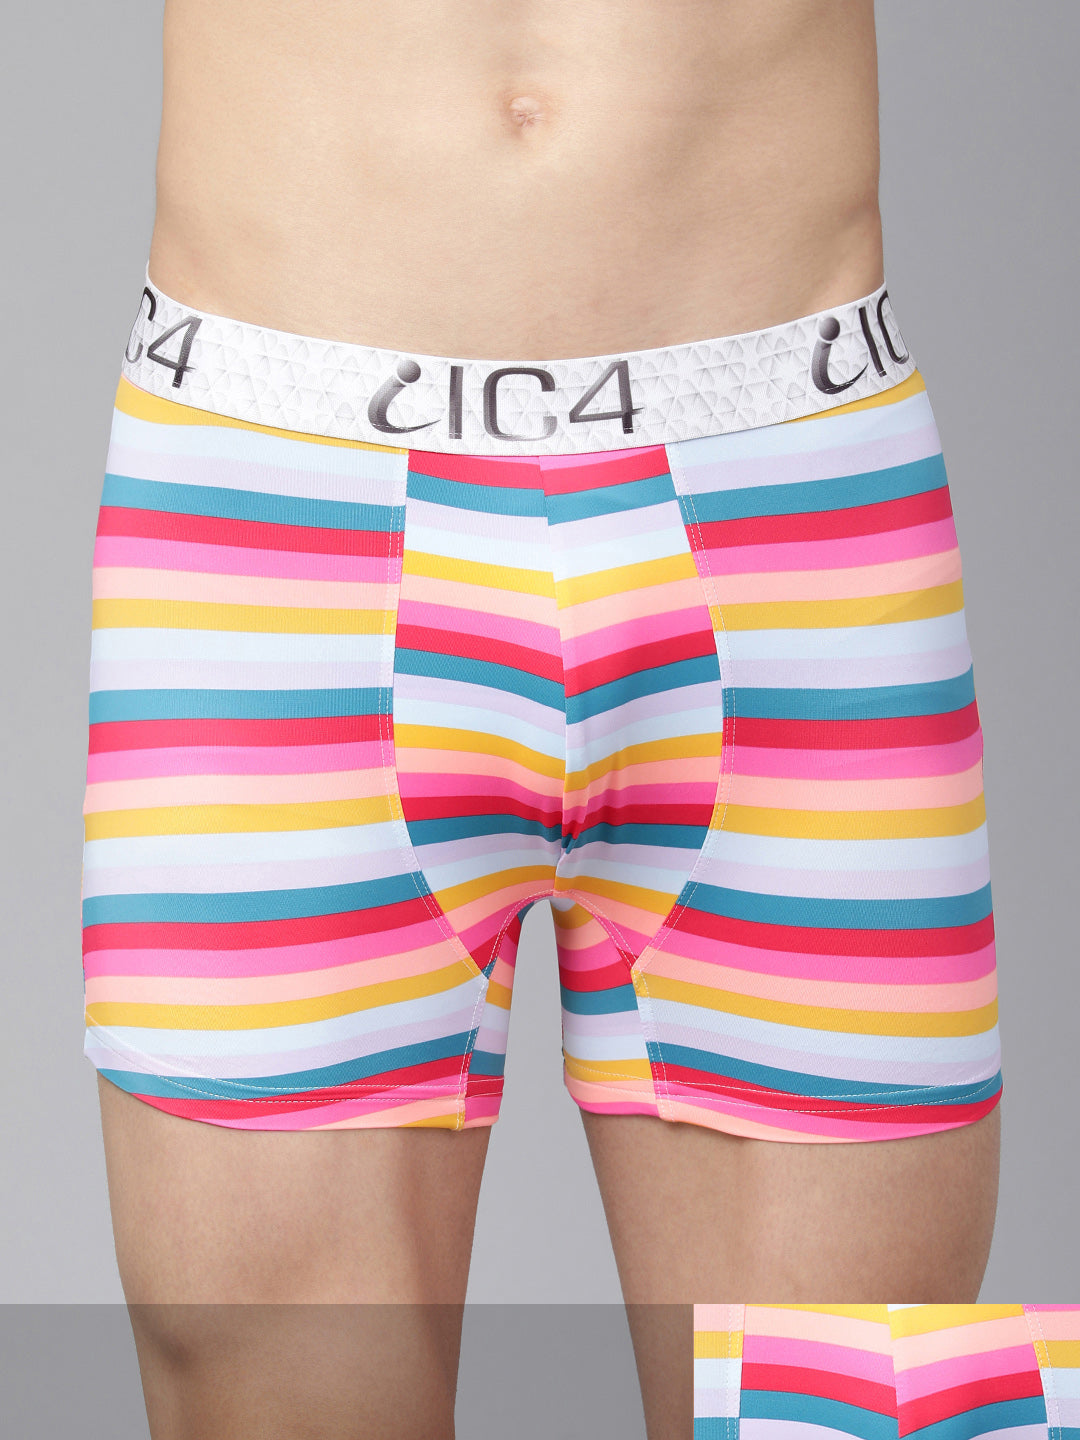 IC4 Men's Fashion Printed Trunk Combo Pack of 2